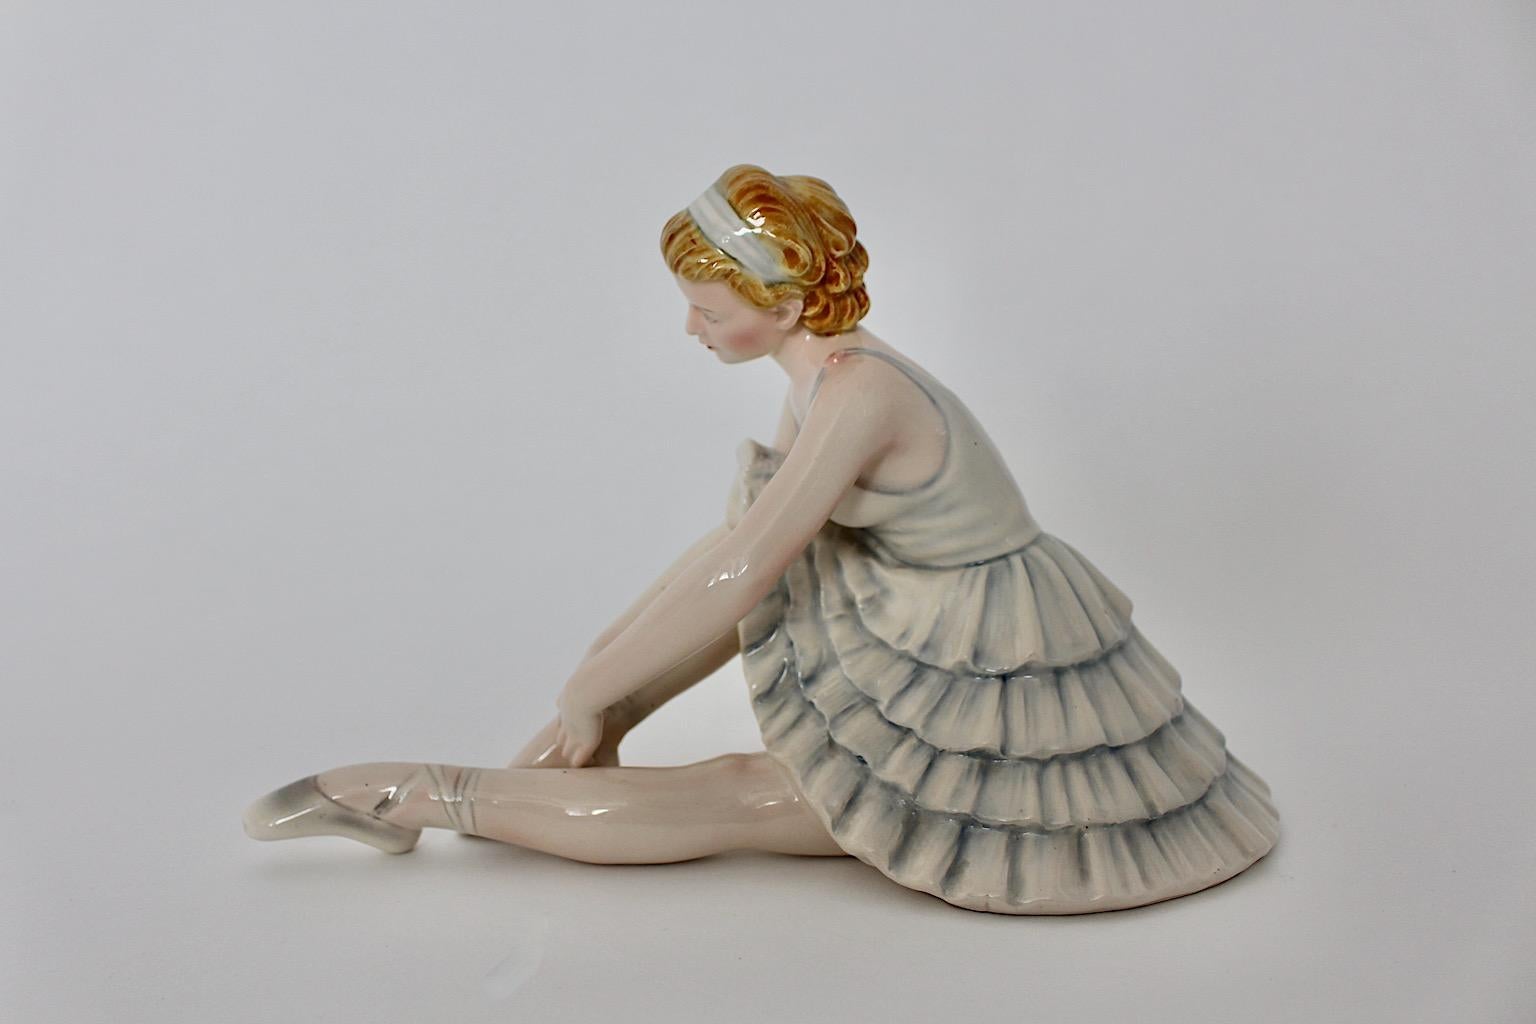 Ceramic figurine dancer ballerina with pastel blue ruffled dress and ballet flats by Stefan Dakon for Keramos, circa 1949.
Amazing and elegant figurine in pastel blue color from ceramic with glossy finish.

Stamped Knight Keramics made in Austria